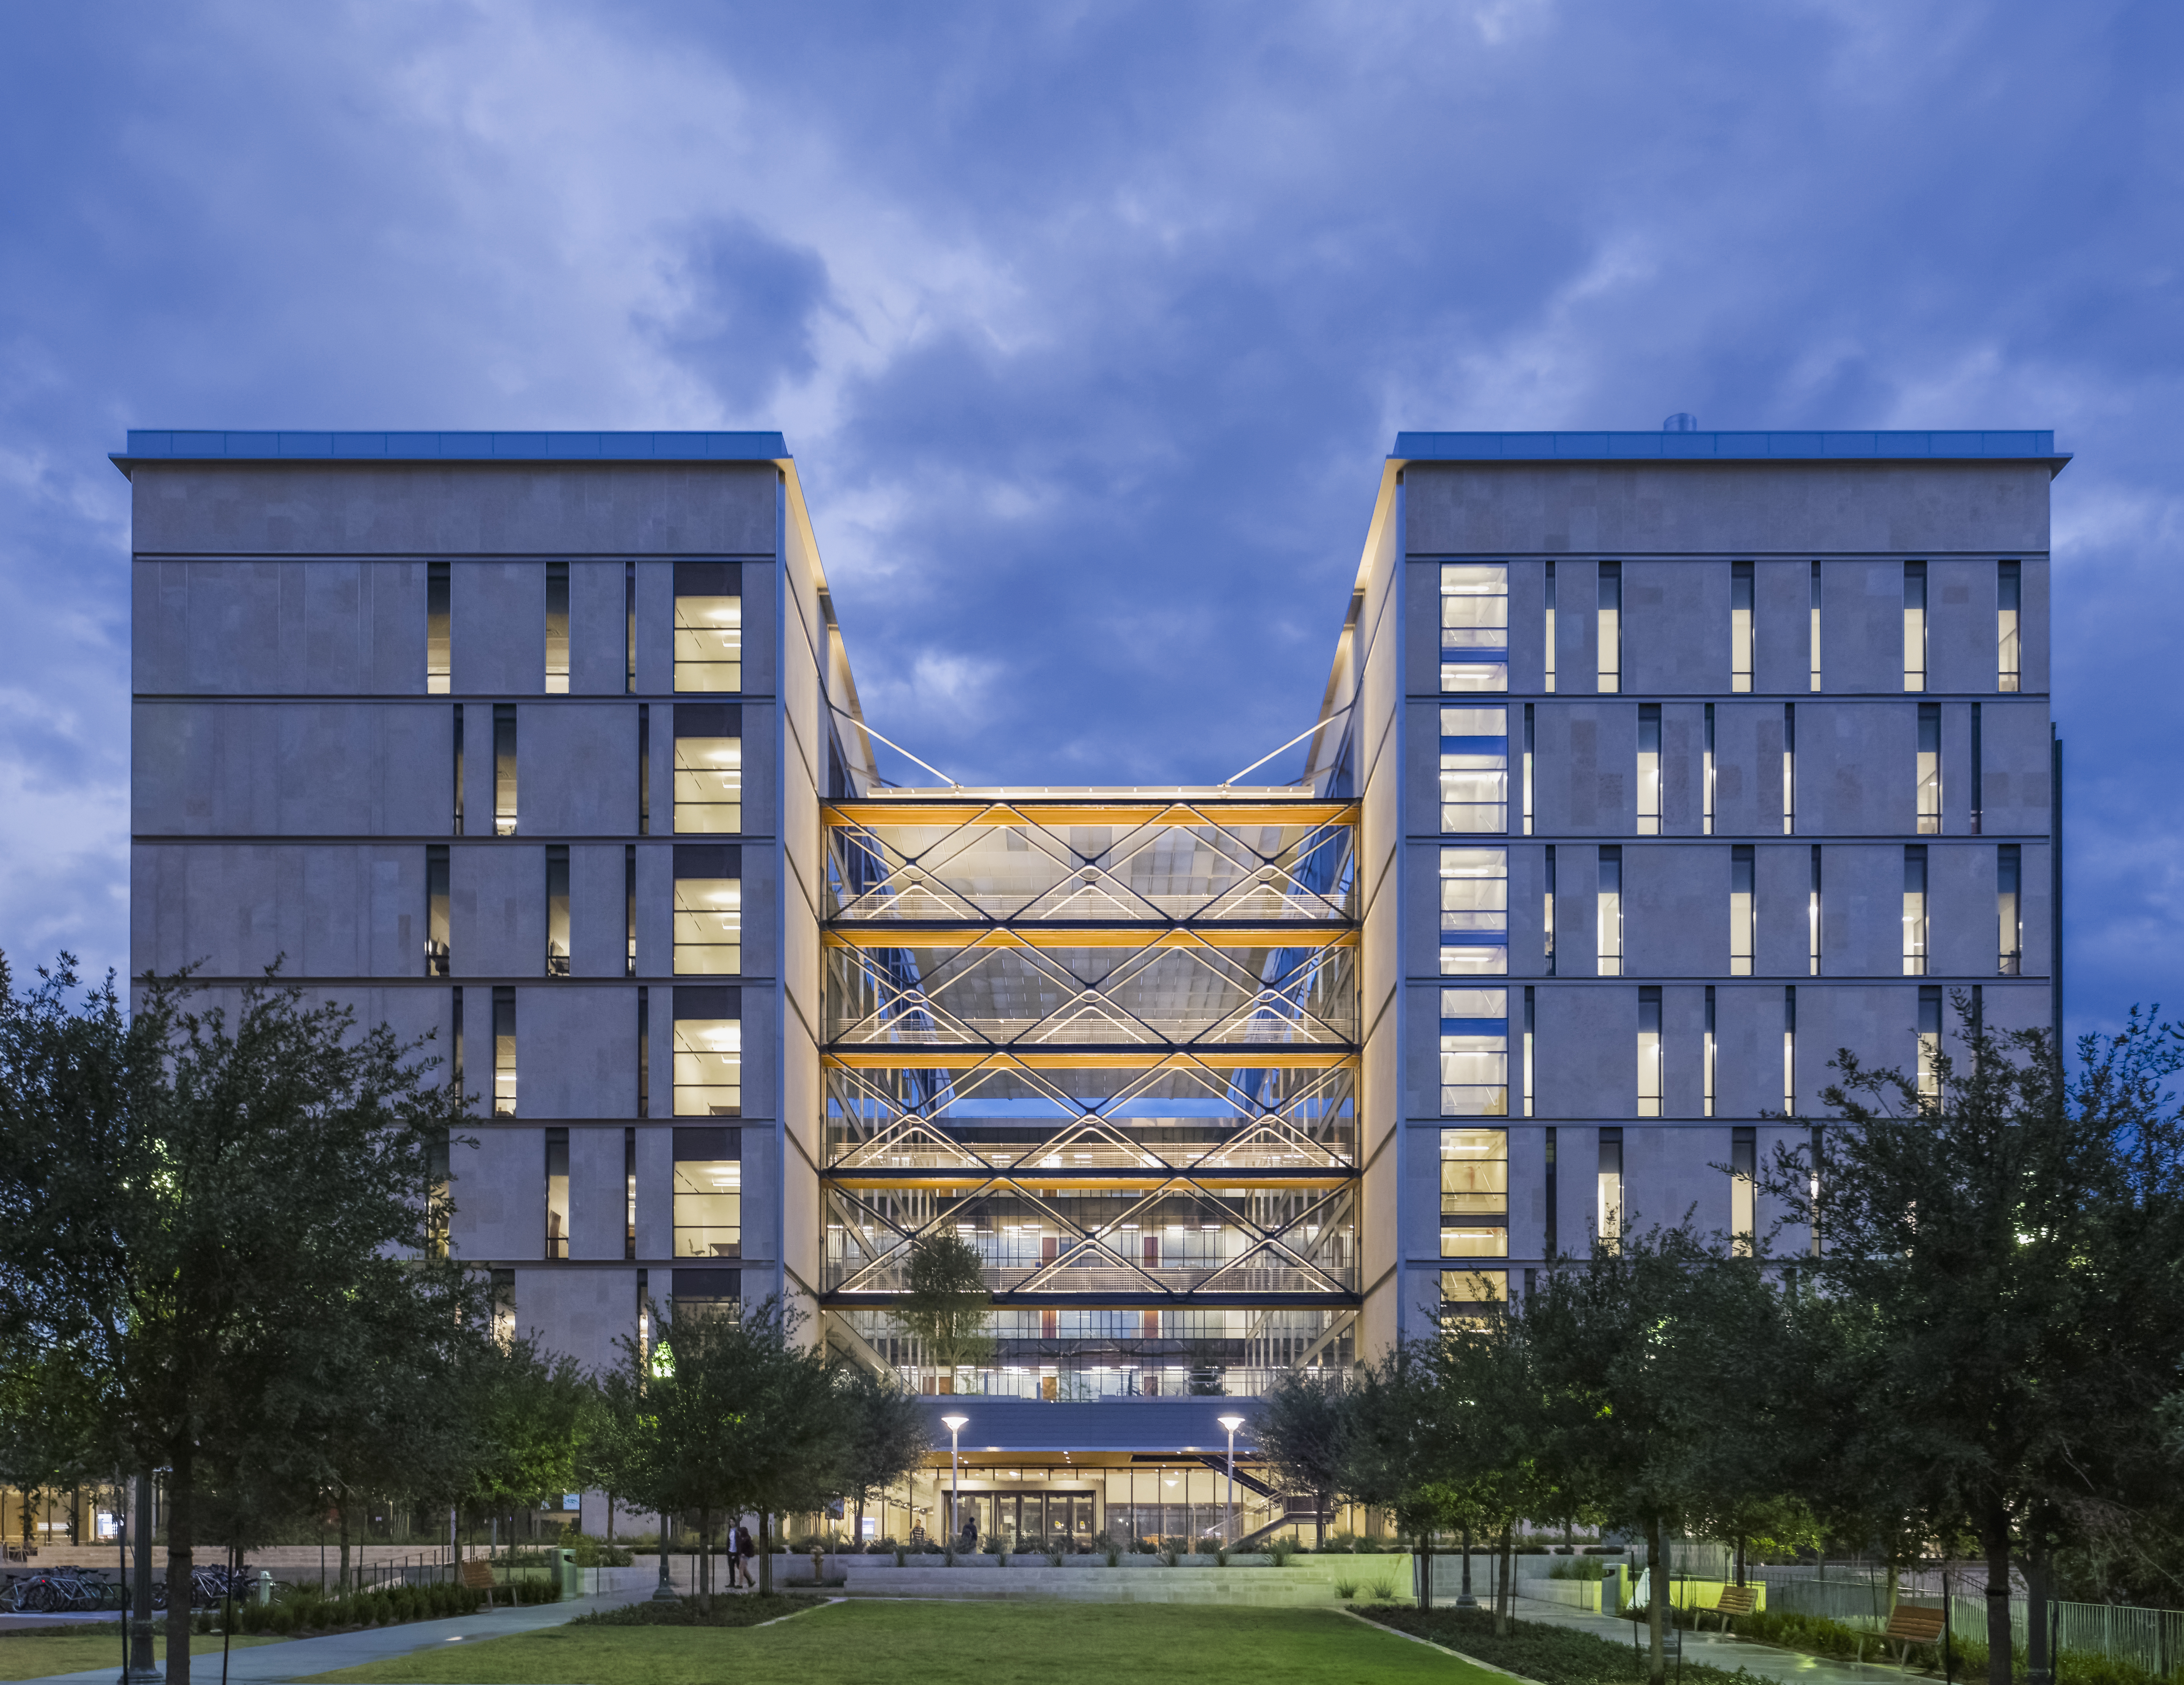 Project: the EERC at the University of Texas, by Ennead Architects